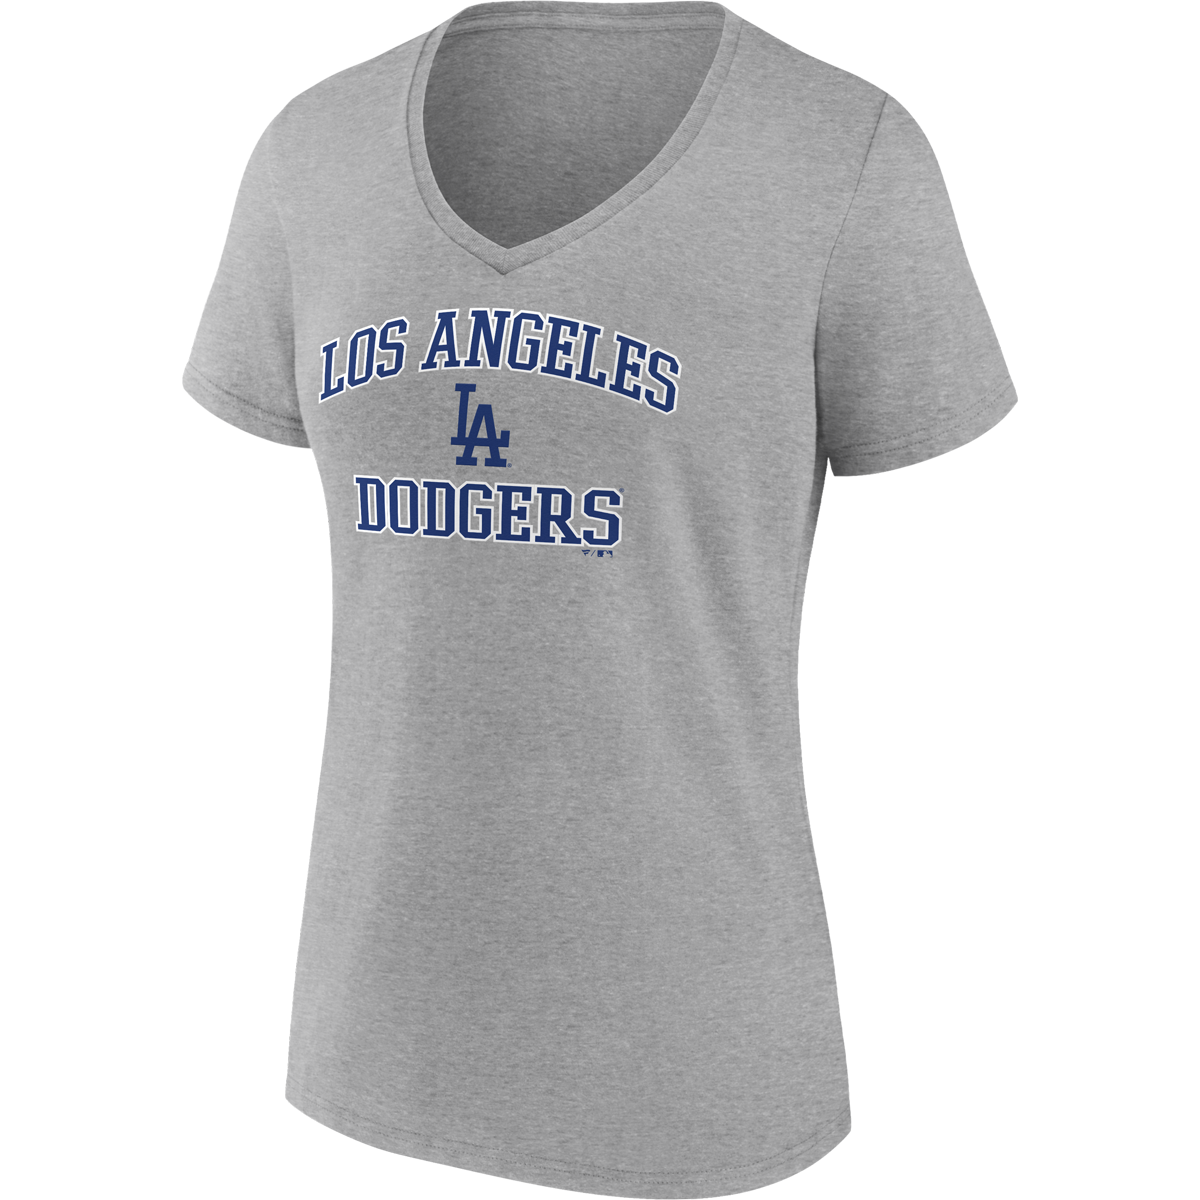 Women's Dodgers Cotton Heart and Soul Short Sleeve alternate view